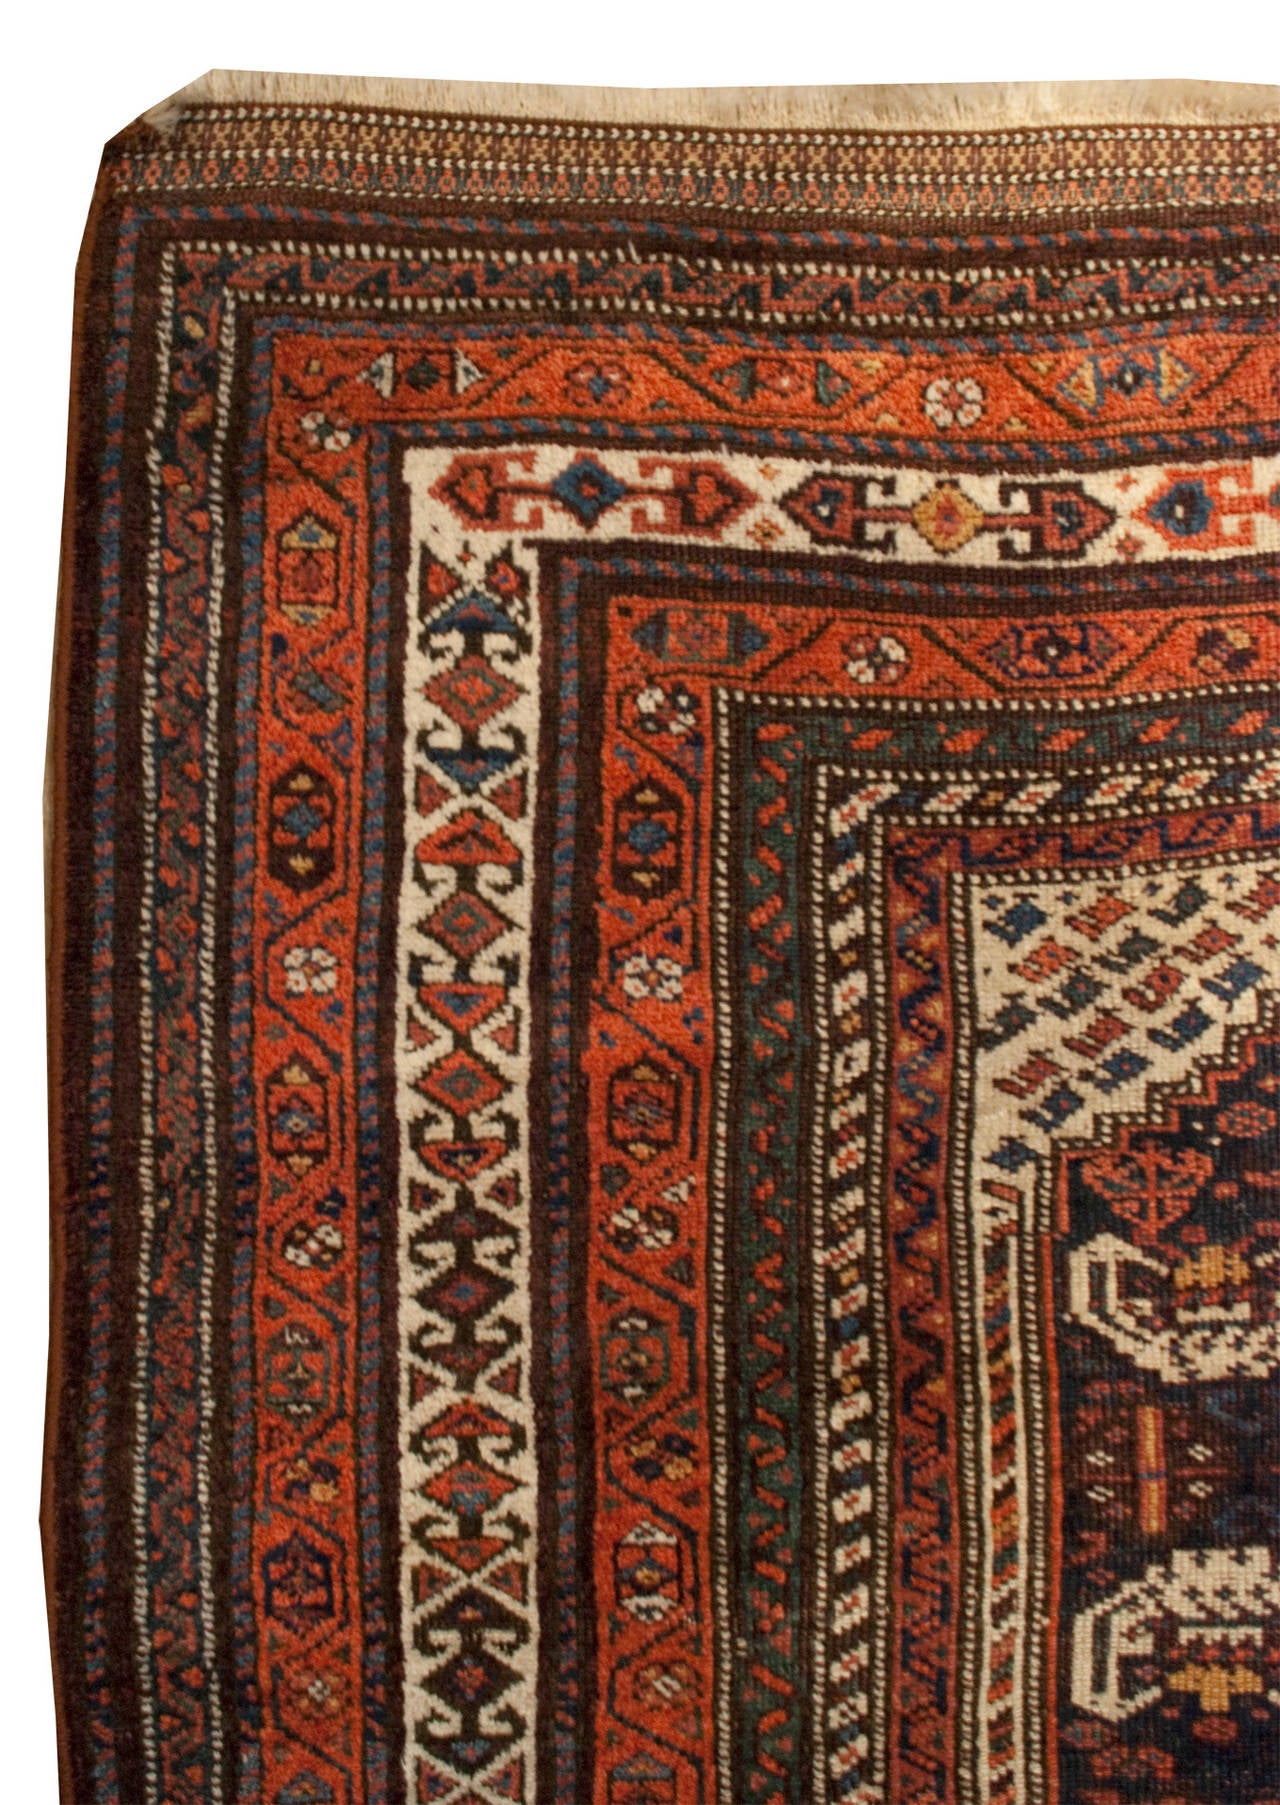 A 19th century Persian Lori rug with a small geometric field surrounded by multiple intricately woven geometric borders.